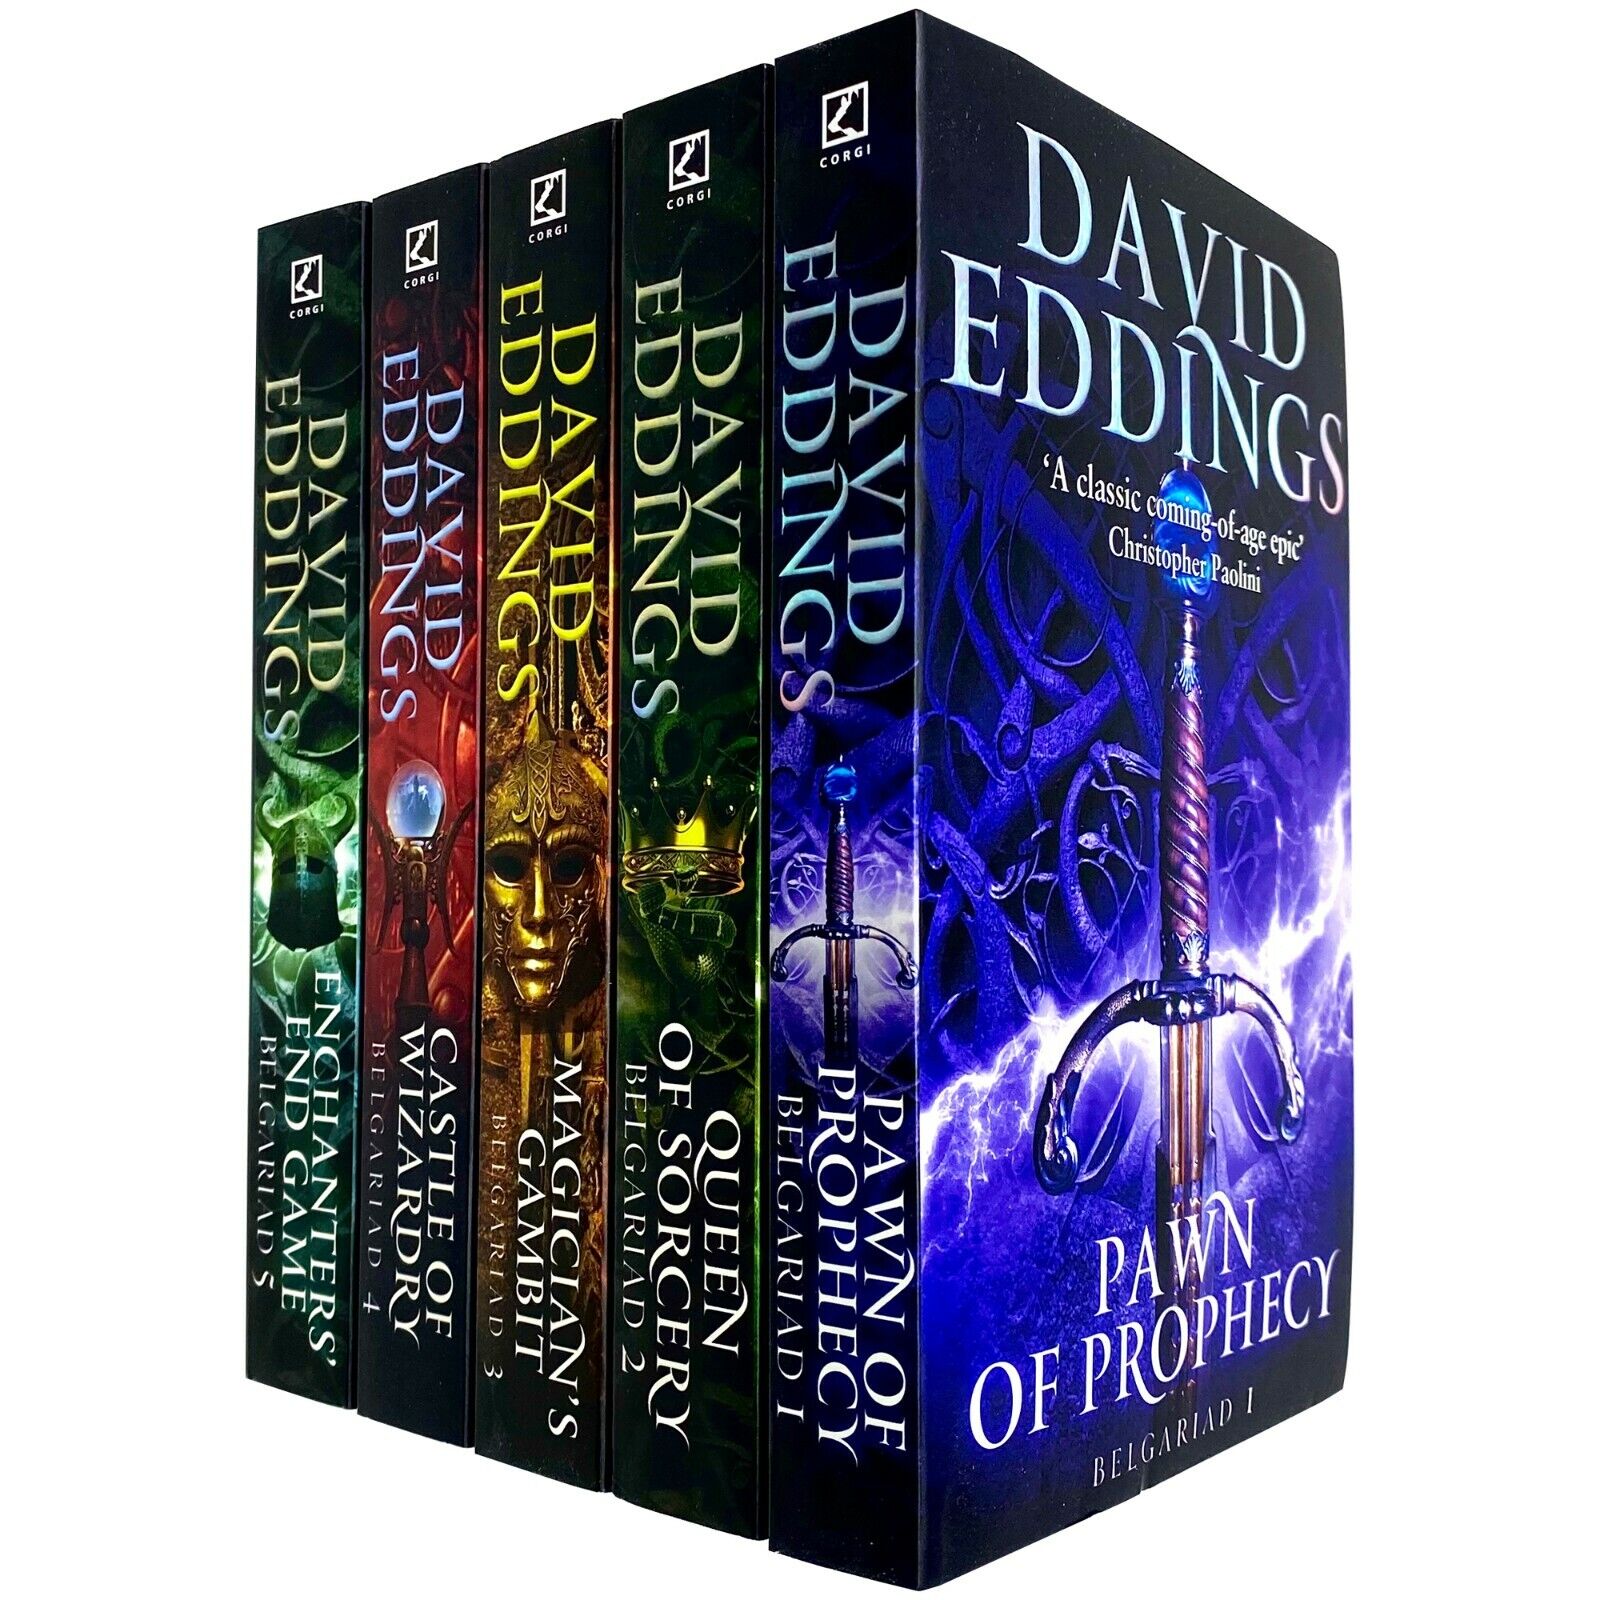 Belgariad Series Books 1-5 Collection Set by David Eddings (Pawn Of Prophecy) - Lets Buy Books